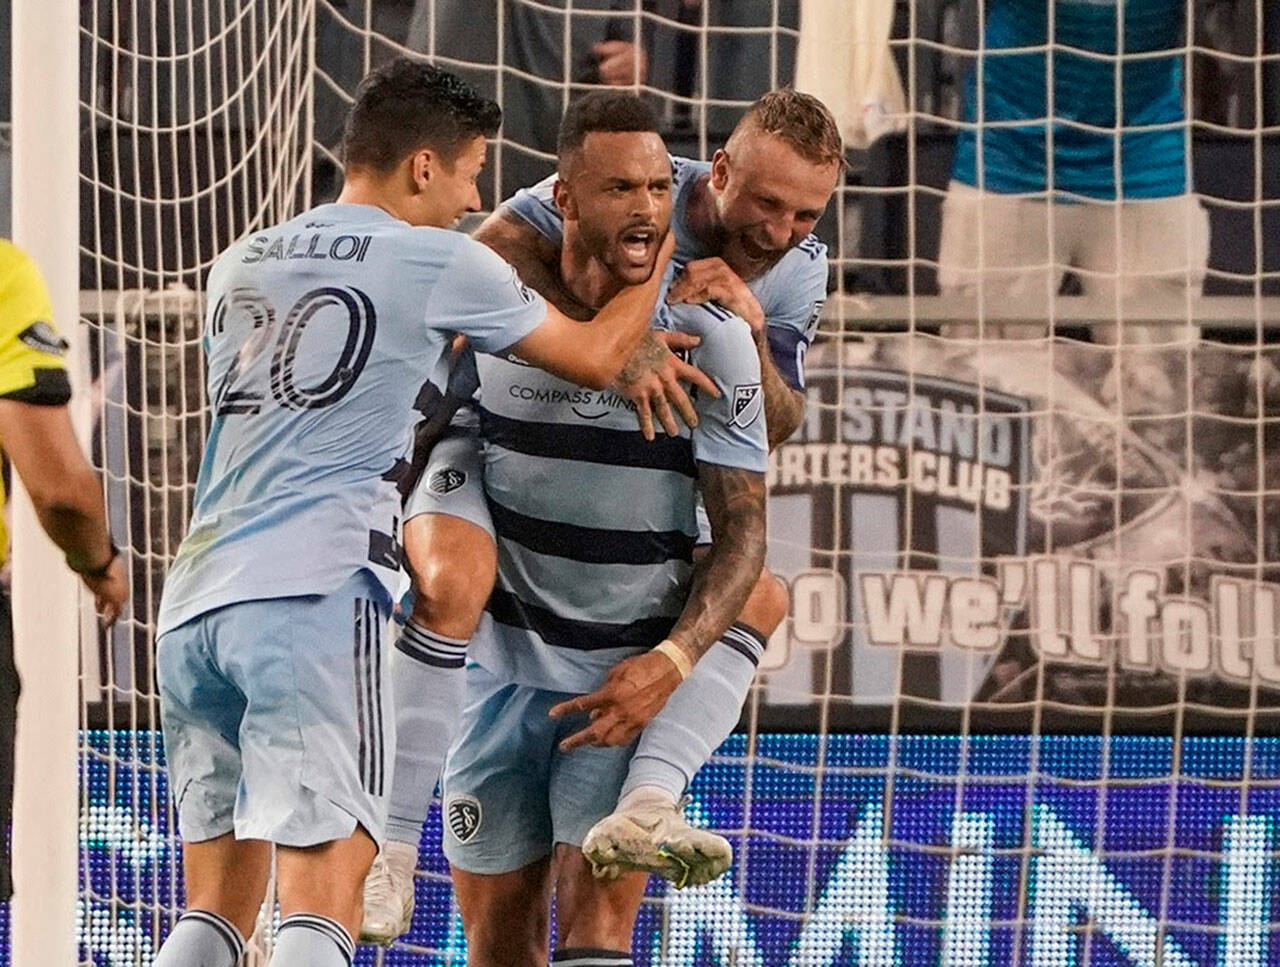 May 10, 2022; Kansas City, Kansas, USA; Sporting Kansas City forward Khiry Shelton (11) celebrates with forward Dániel Salloi (20) and forward Johnny Russell (7) after scoring against FC Dallas during extra time at Children's Mercy Park. Mandatory Credit: Denny Medley-USA TODAY Sports